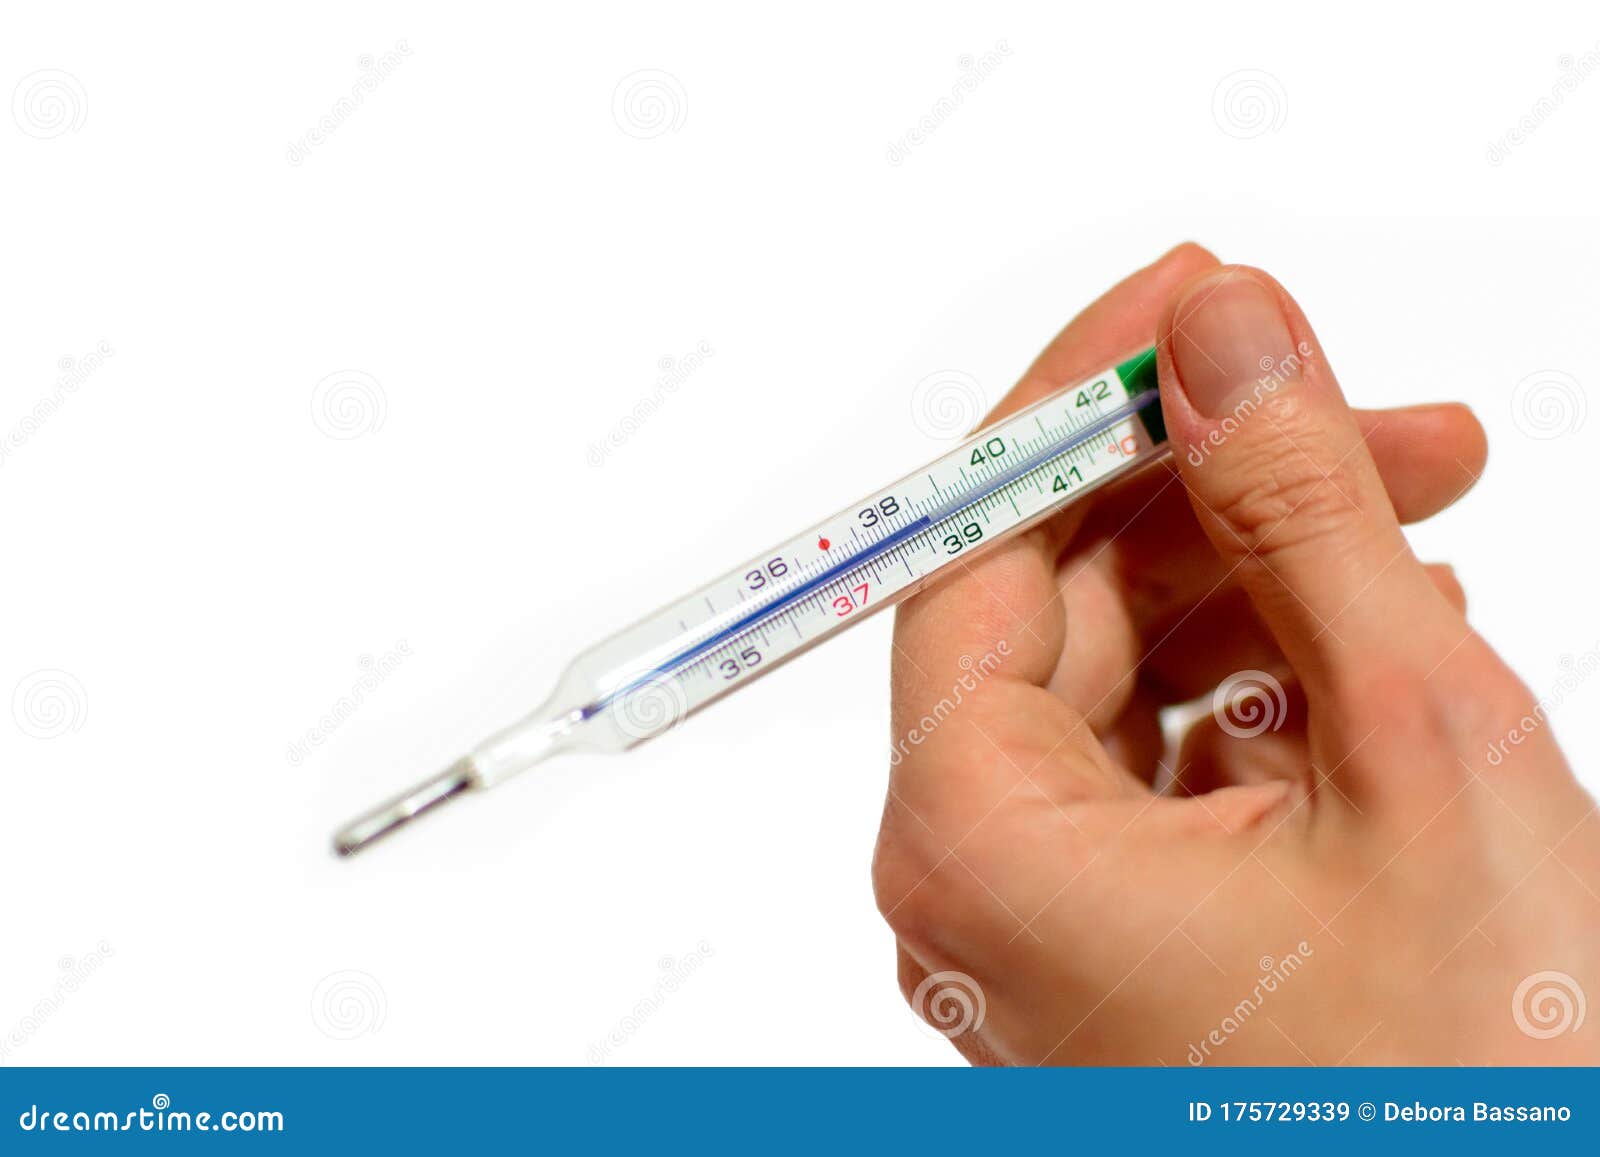 Glass Alcohol Thermometer Degrees Celsius Measuring Stock Photo